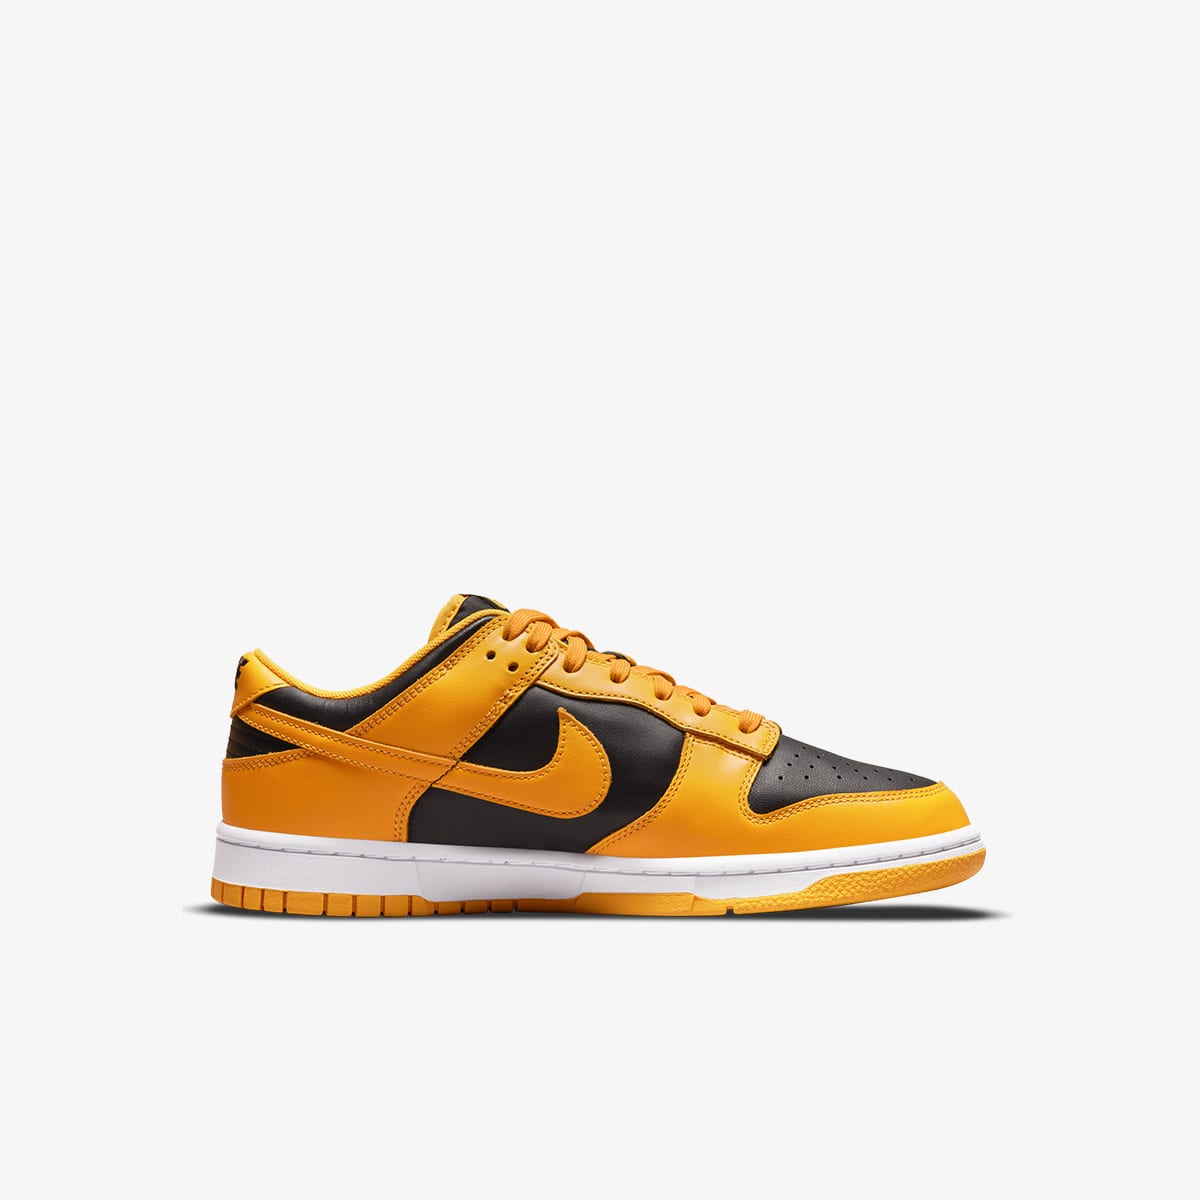 Nike Dunk Low Retro (Black & Gold) | END. Launches